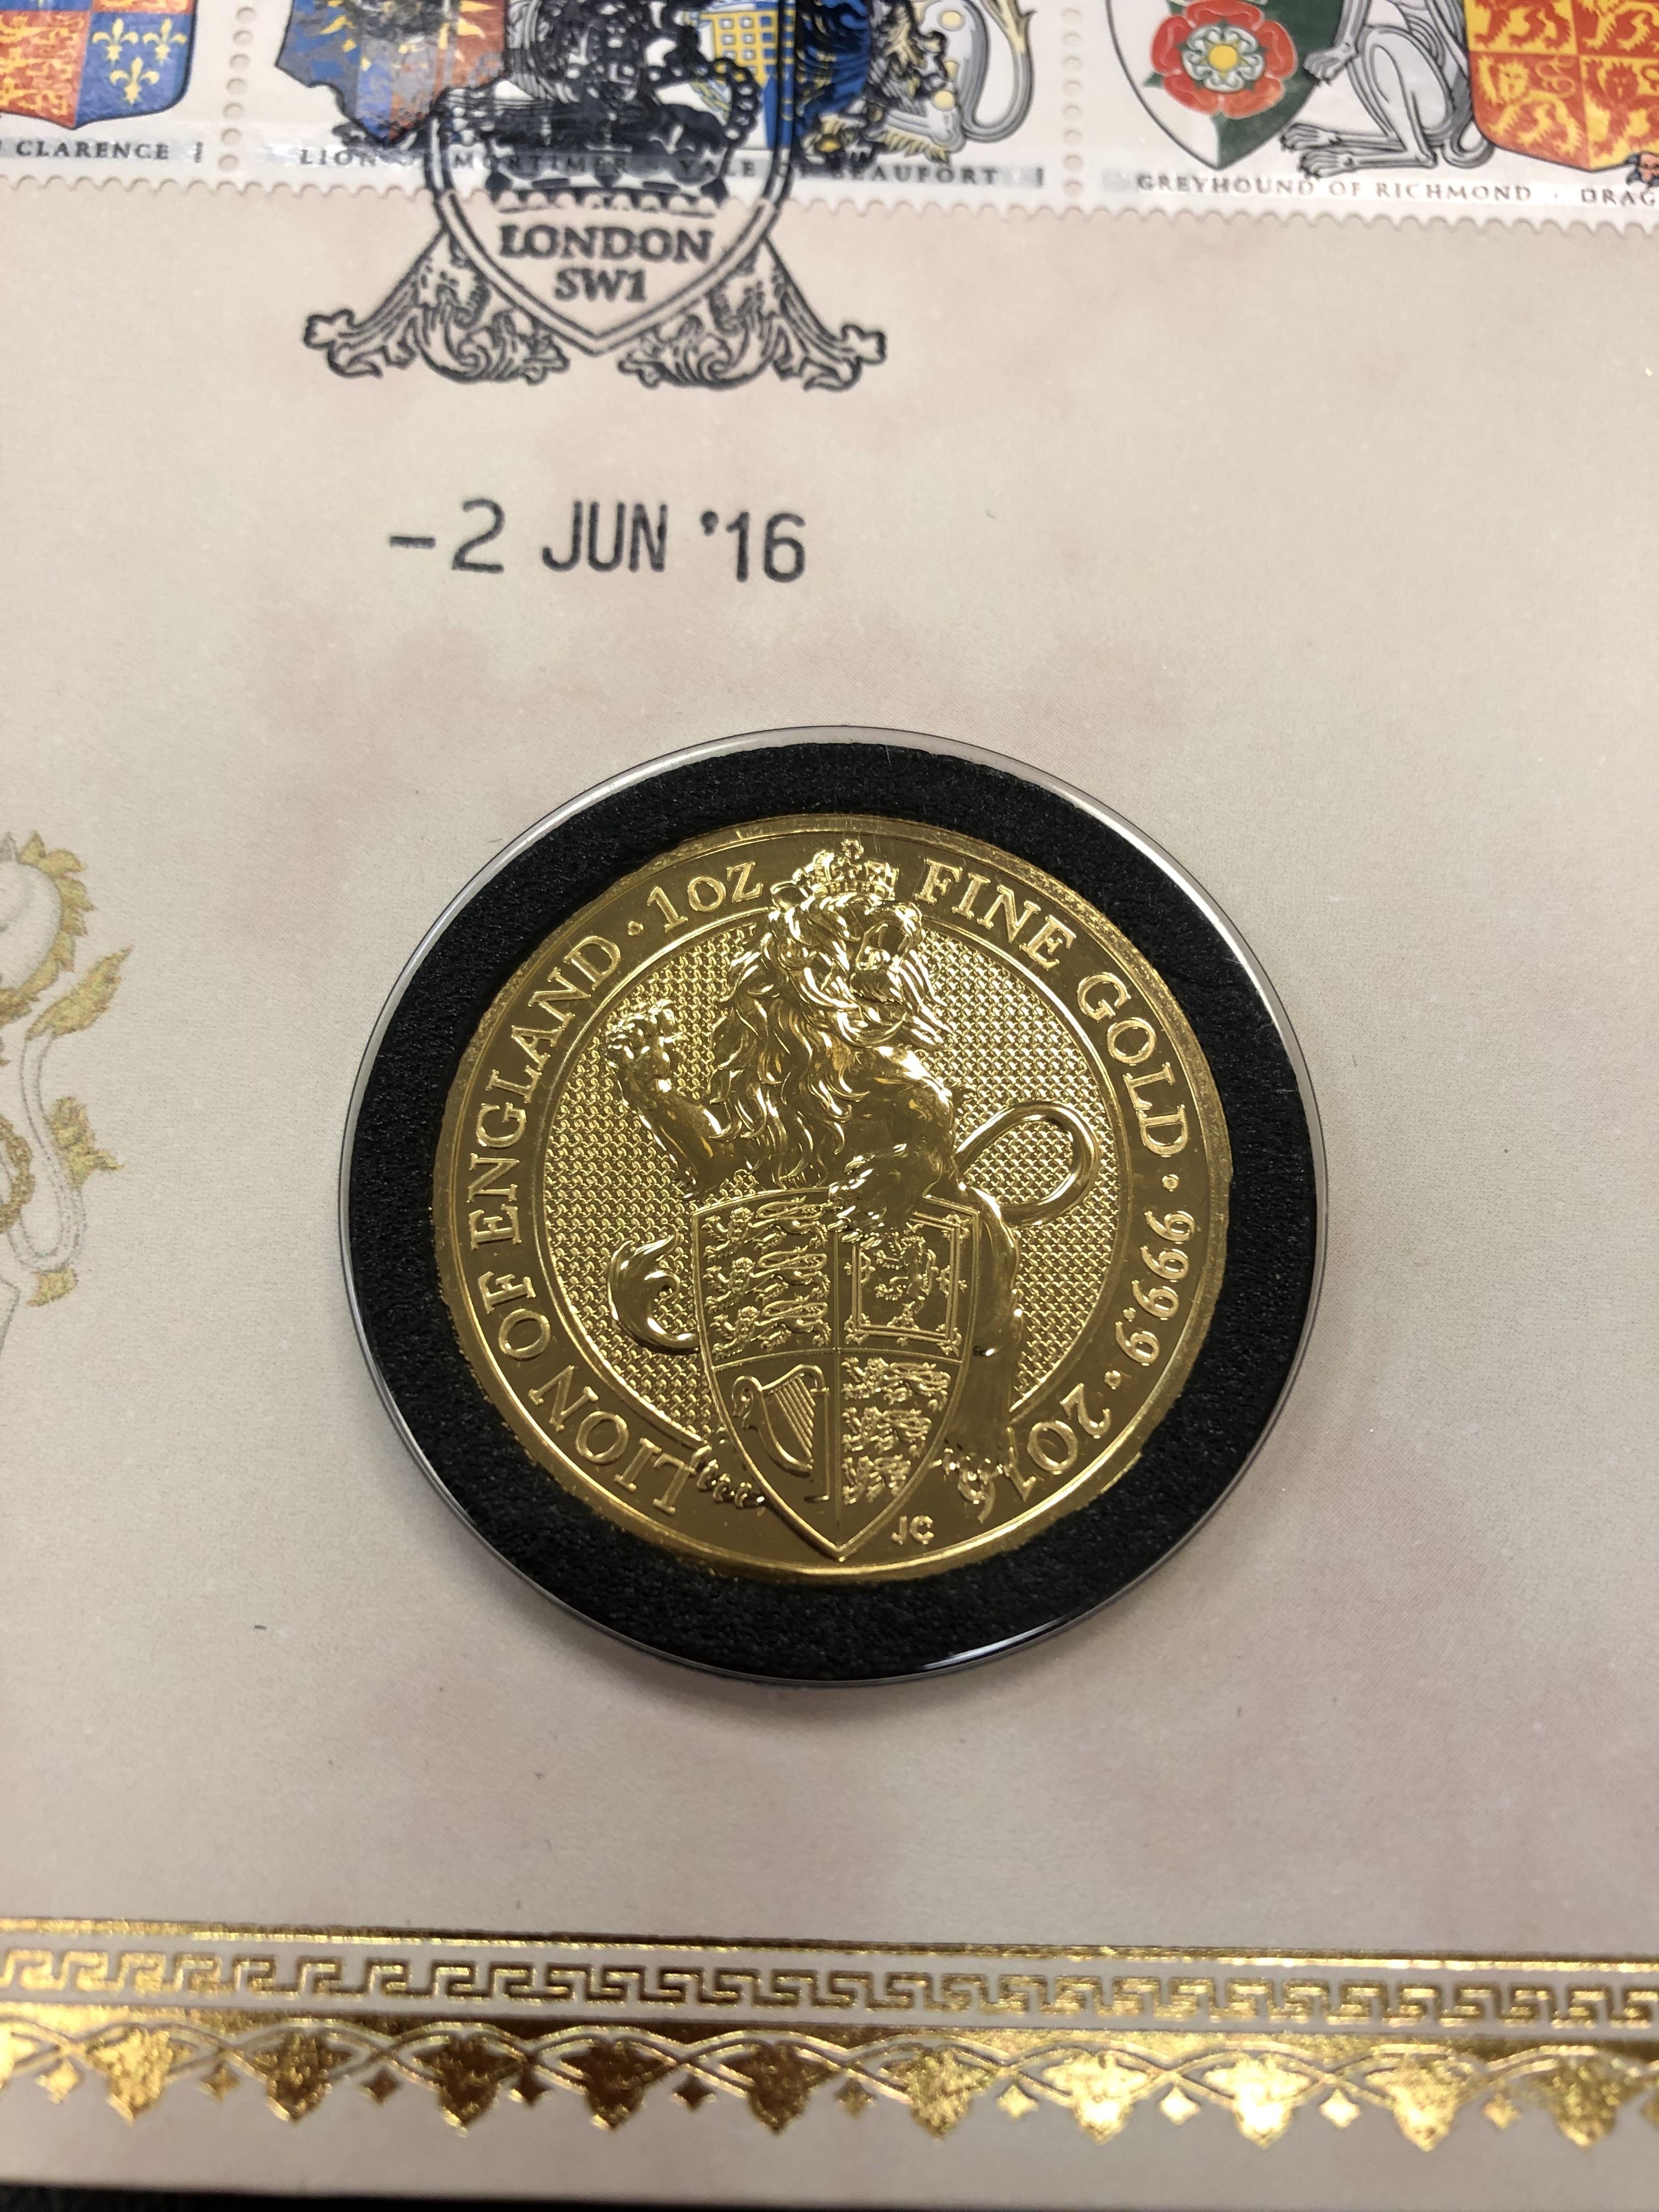 The Queen's Beasts 1oz Fine Gold Presentation Cover, with certificate of authenticity. - Image 2 of 3